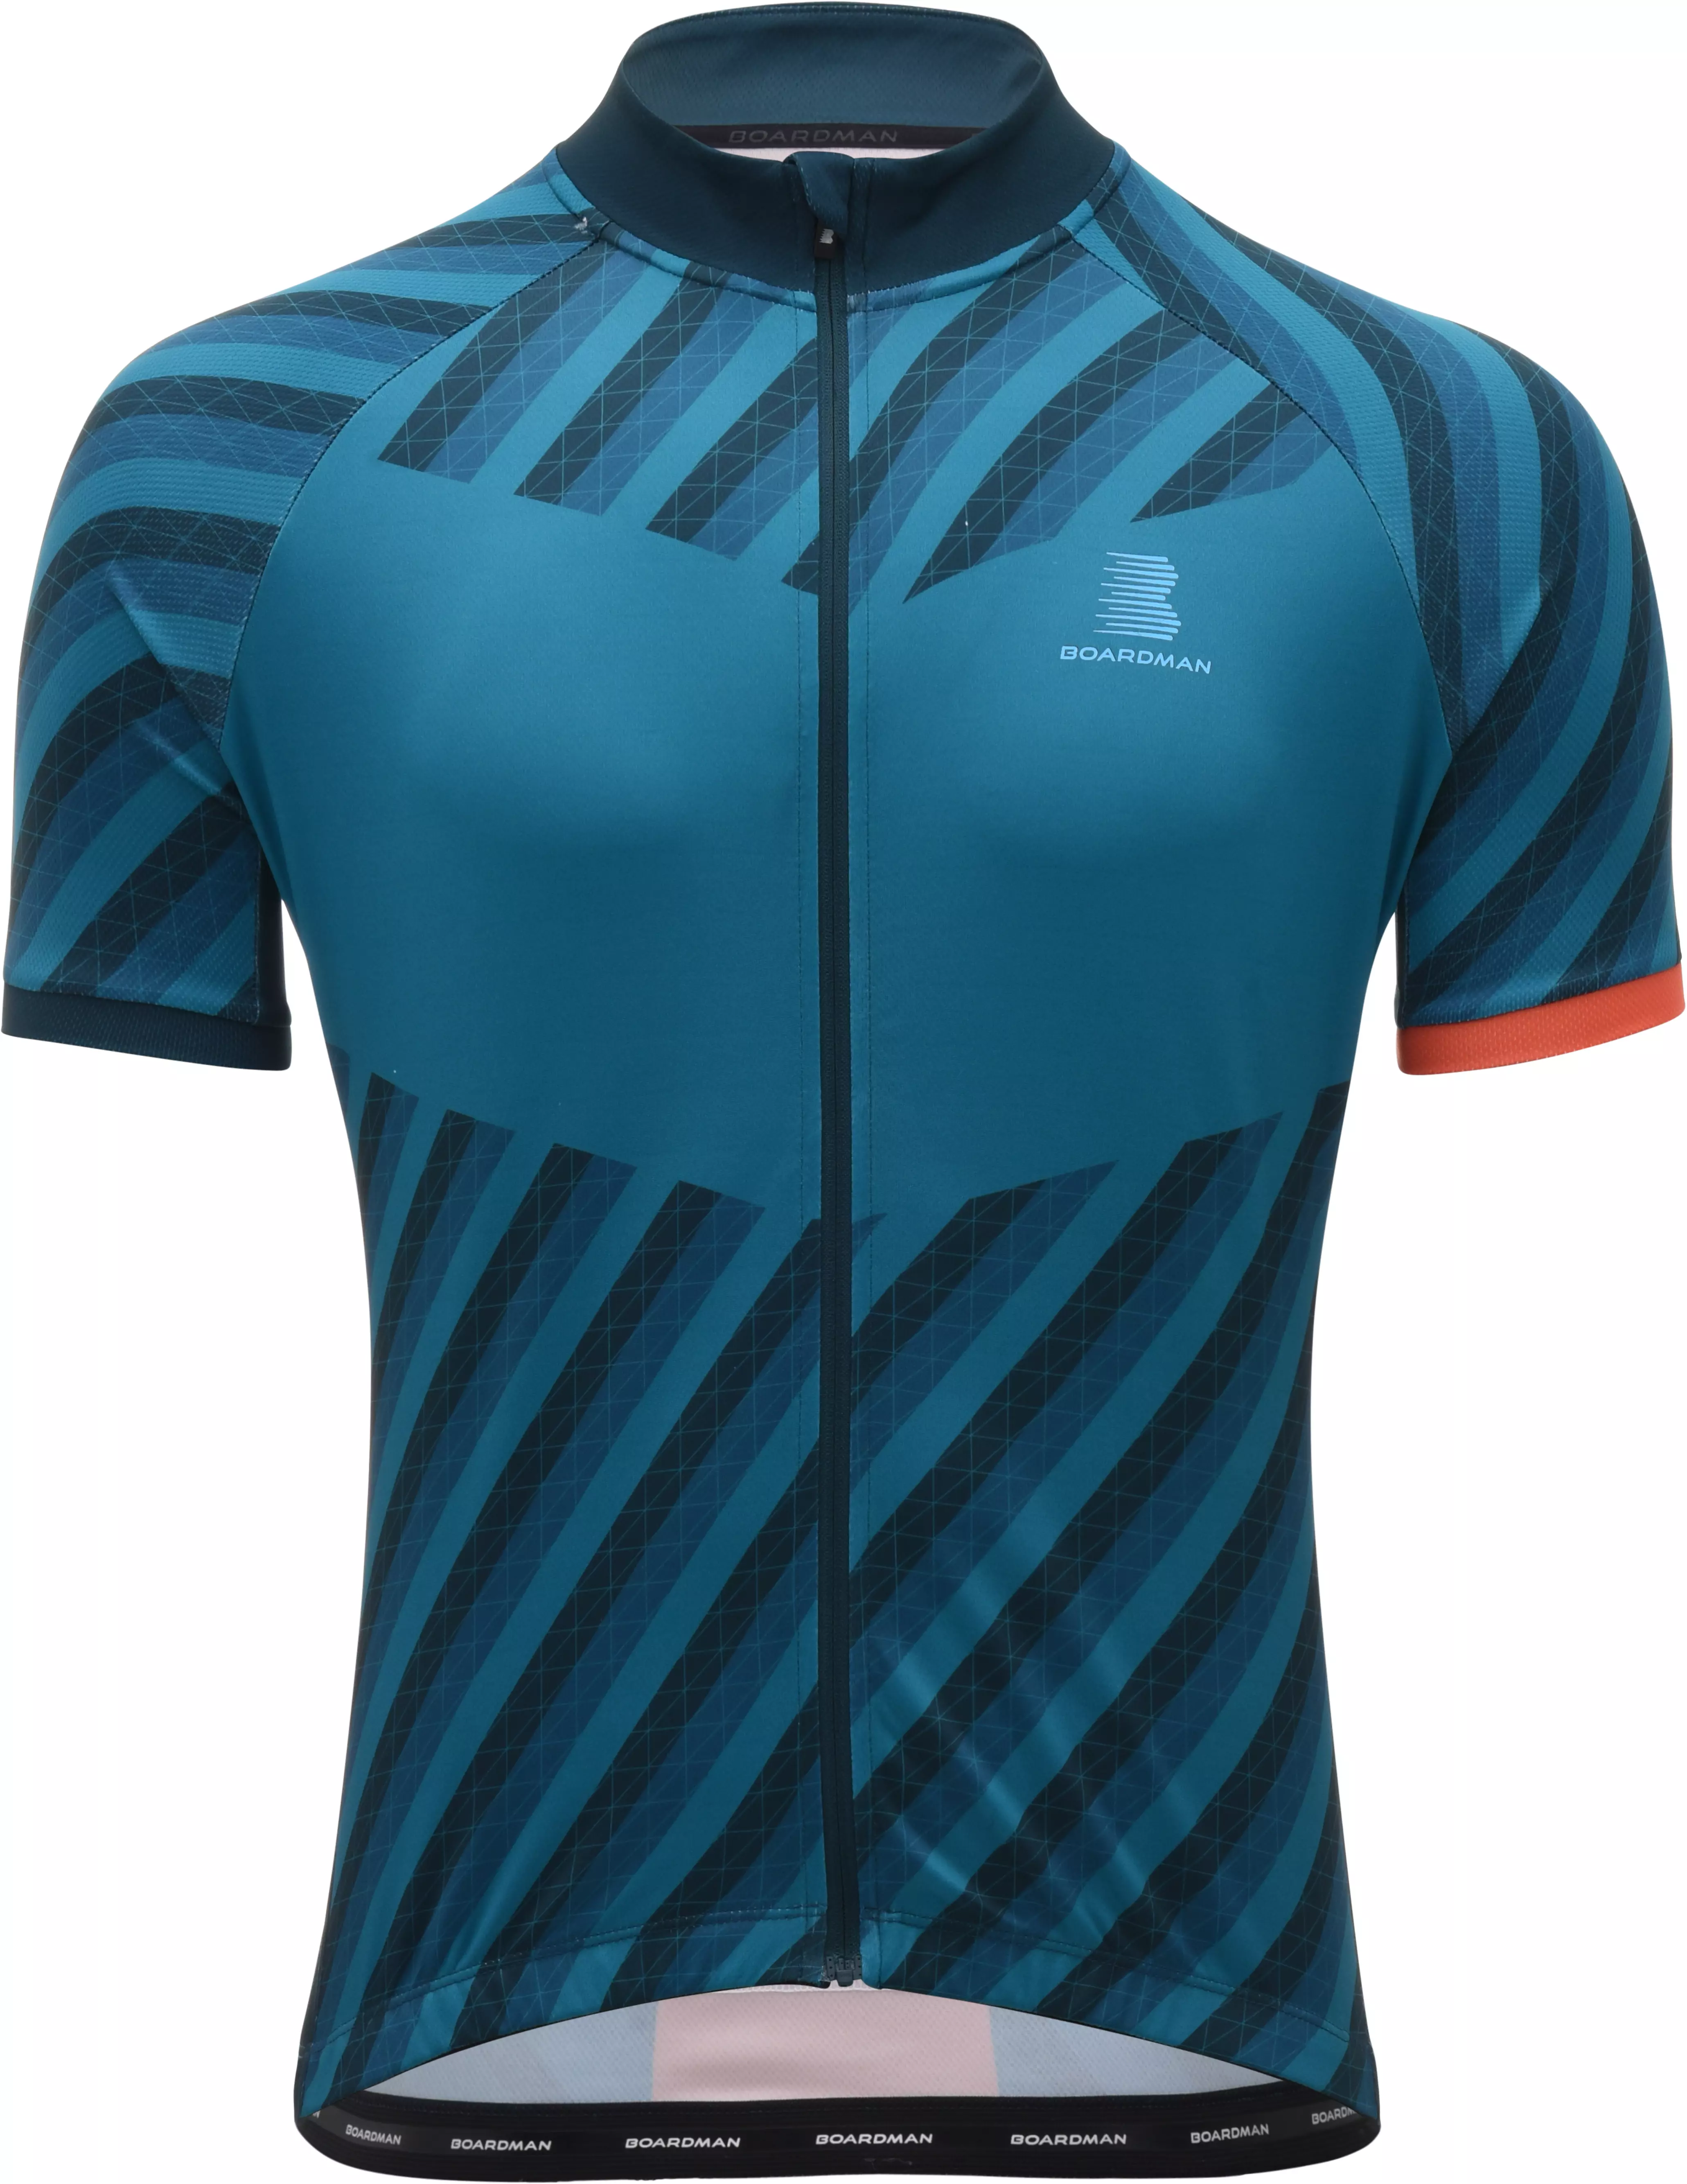 teal cycling jersey